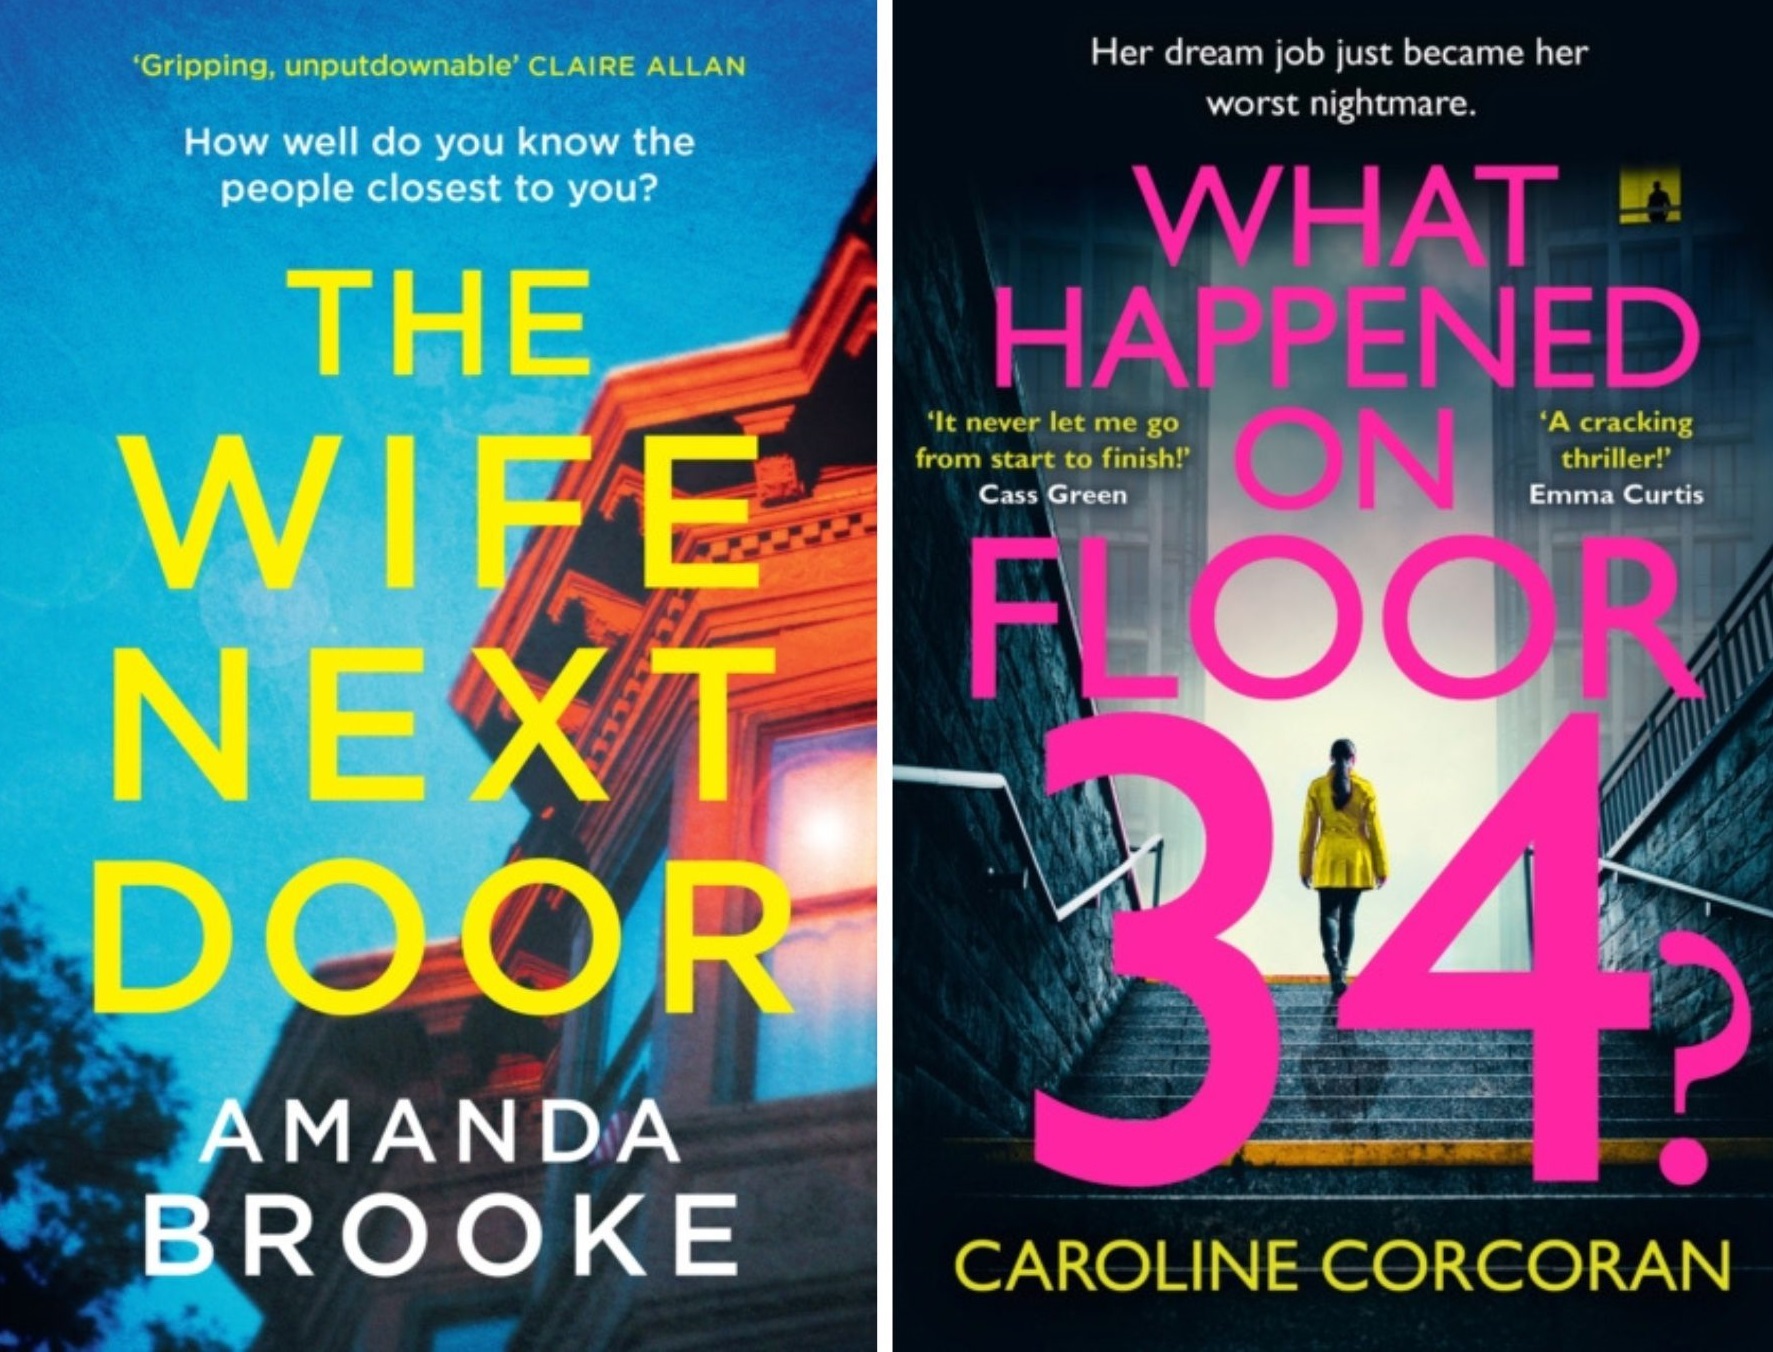 The Wife Next Door by Amanda Brooke, and What happened on Floor 34? by Caroline Corcoran.